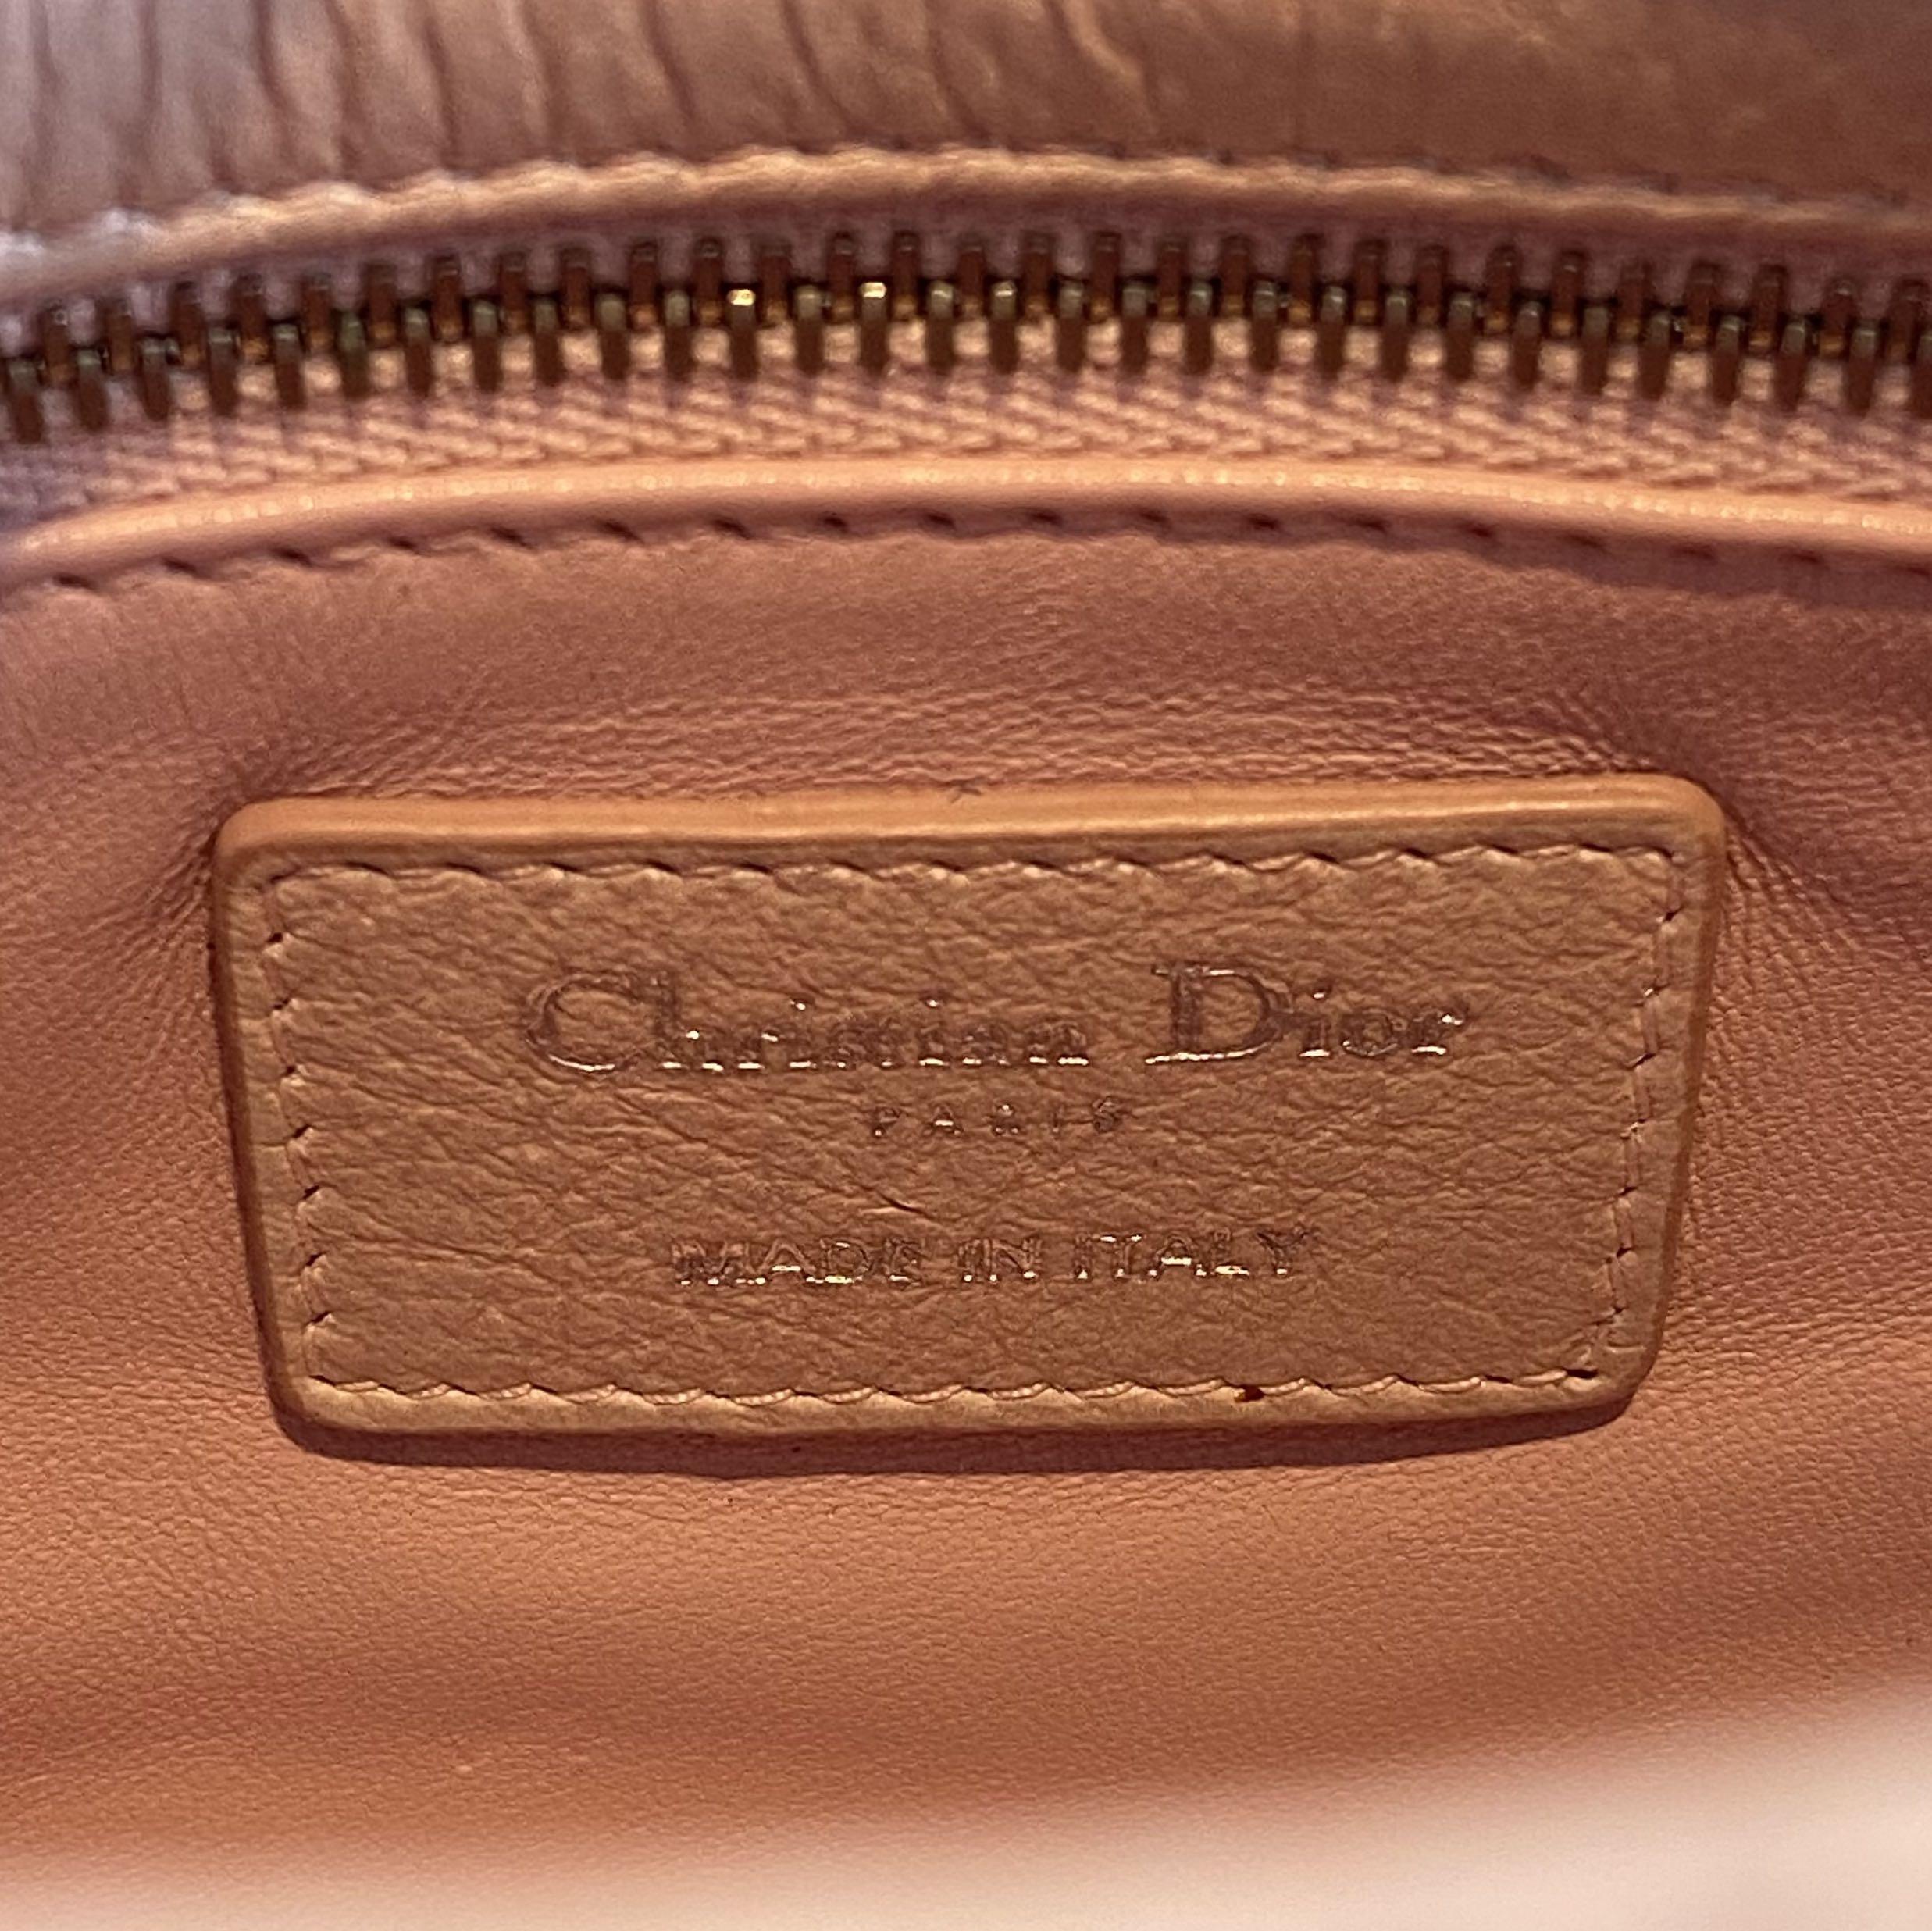 Christian Dior Lady Dior Clutch in Dusty Pink — UFO No More